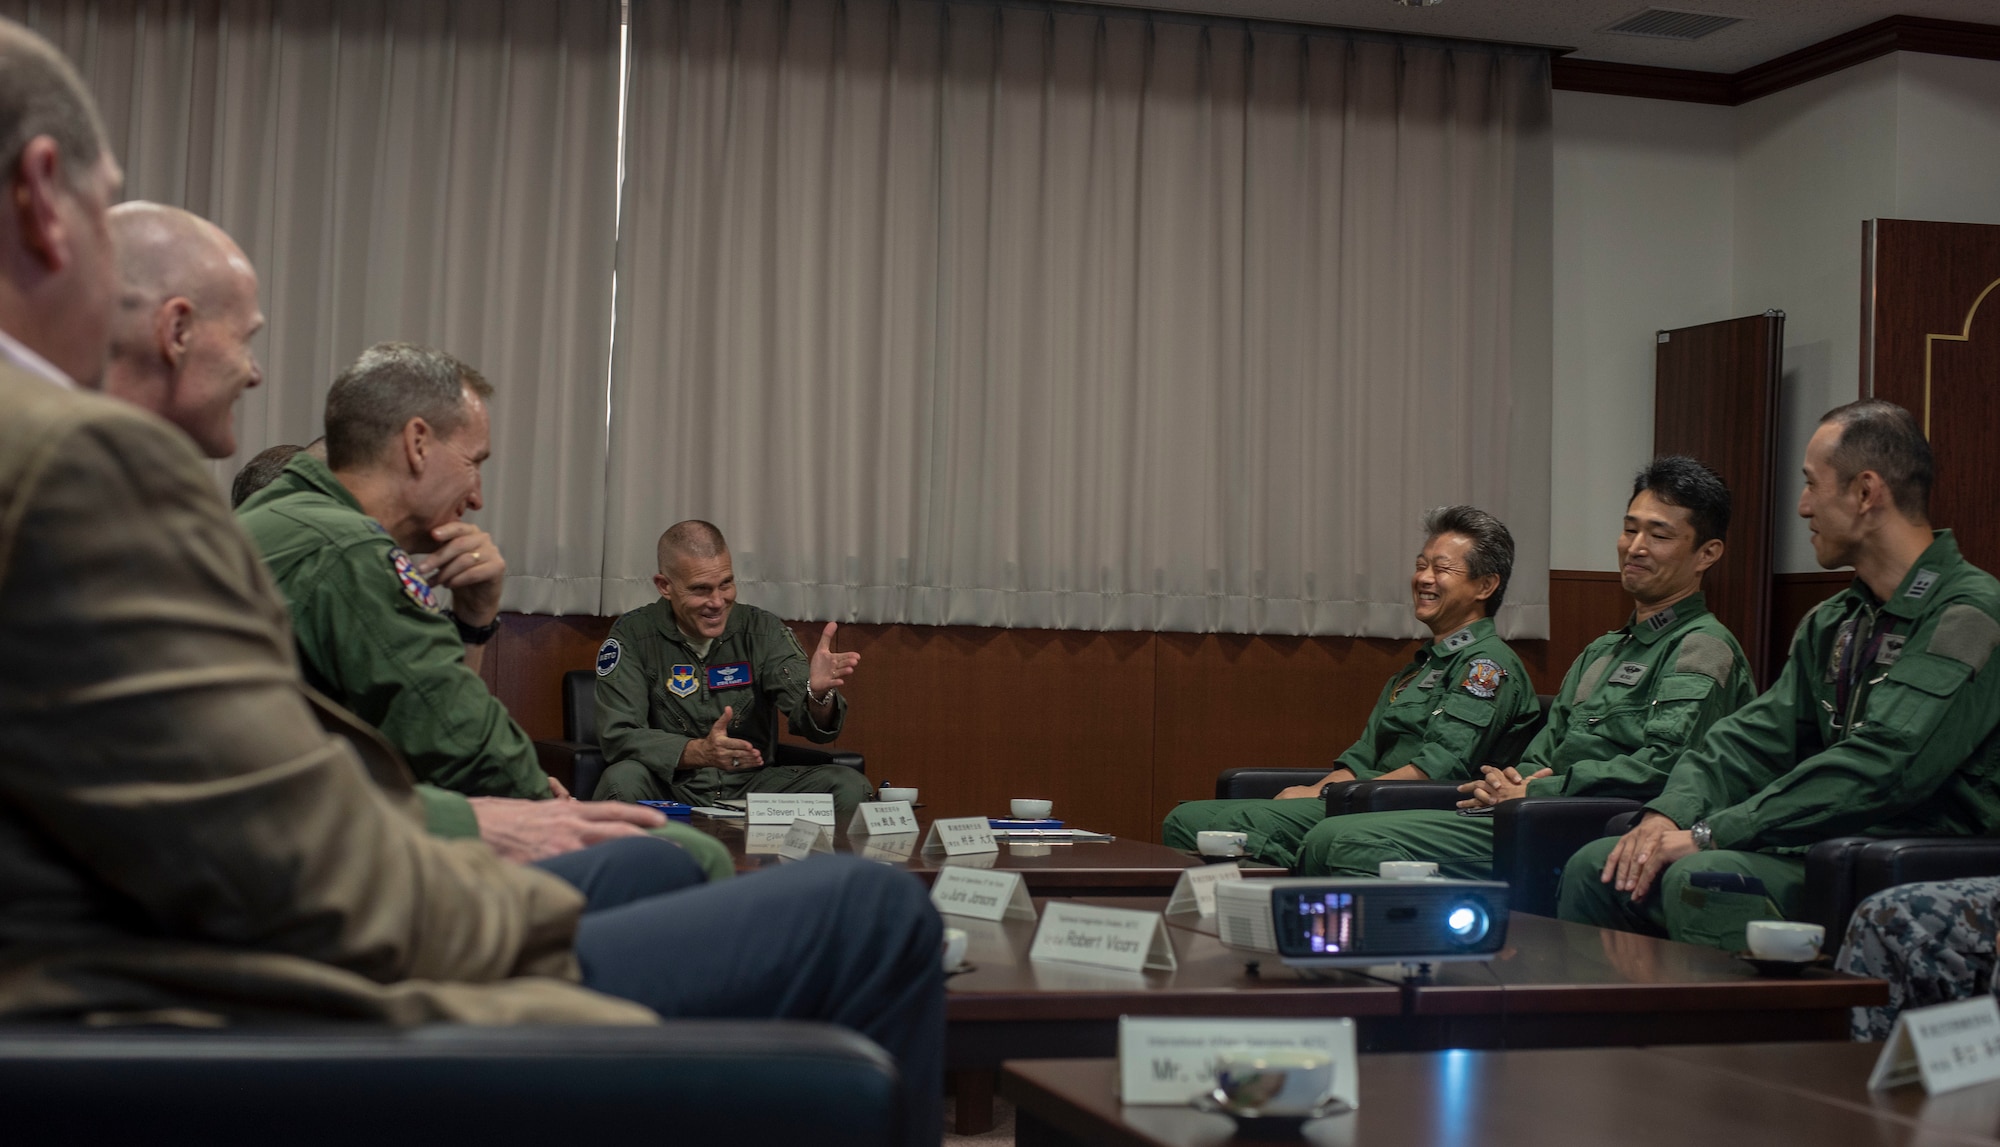 U.S. Air Force Lt. Gen. Steven Kwast, commander of Air Education and Training Command, meets with Japan Air Self-Defense Force leadership at Misawa Air Base, Japan, Aug. 6, 2018. Kwast’s visit increased bilateral coordination for the F-35 Lightning II program as well as reaffirmed AETC’s training and support roles in the region. (U.S. Air Force photo by Airman 1st Class Collette Brooks)